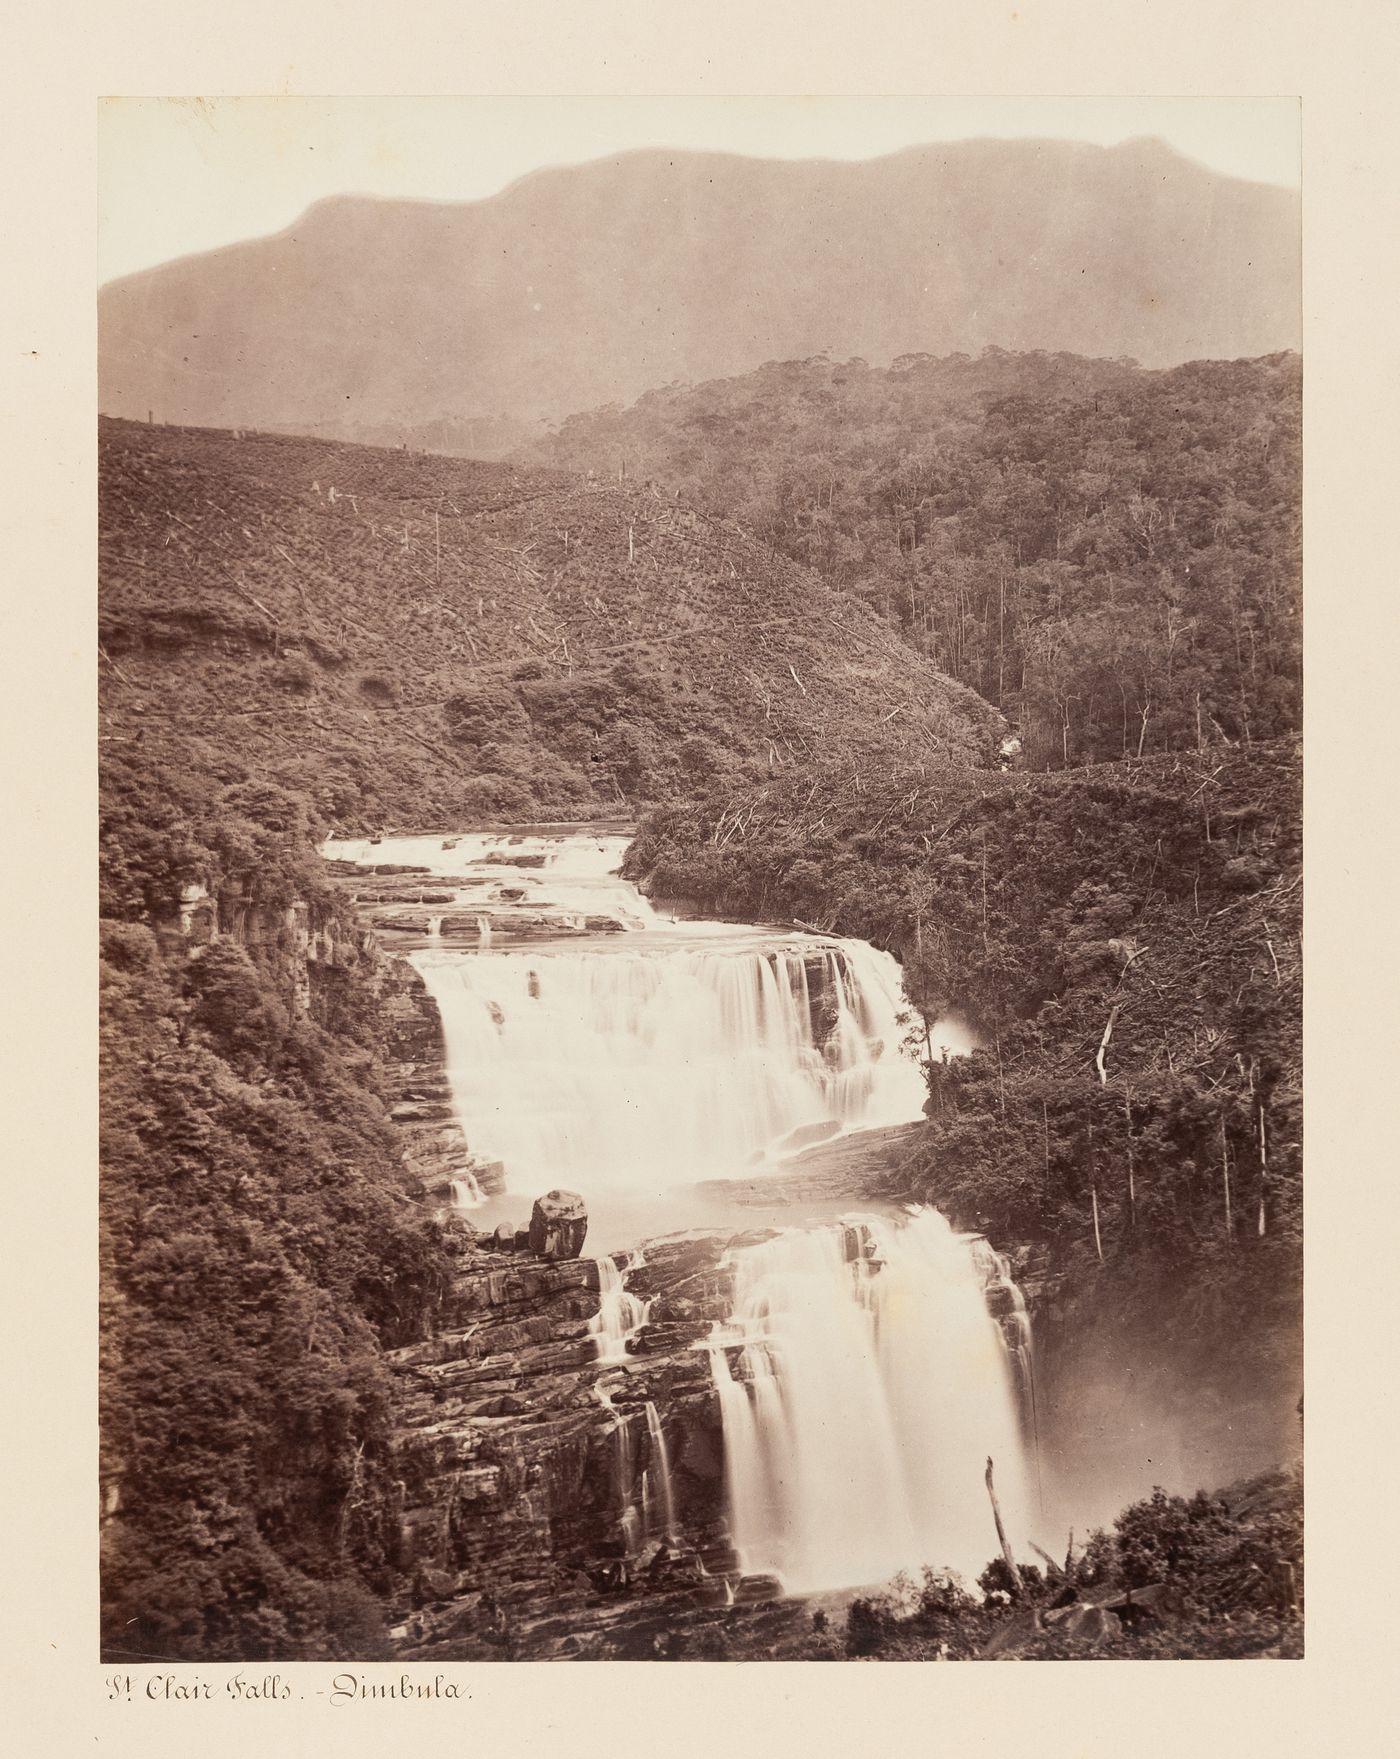 View of the St. Clair Falls with a plantation and mountains in the background, Dambulla, Ceylon (now Sri Lanka)